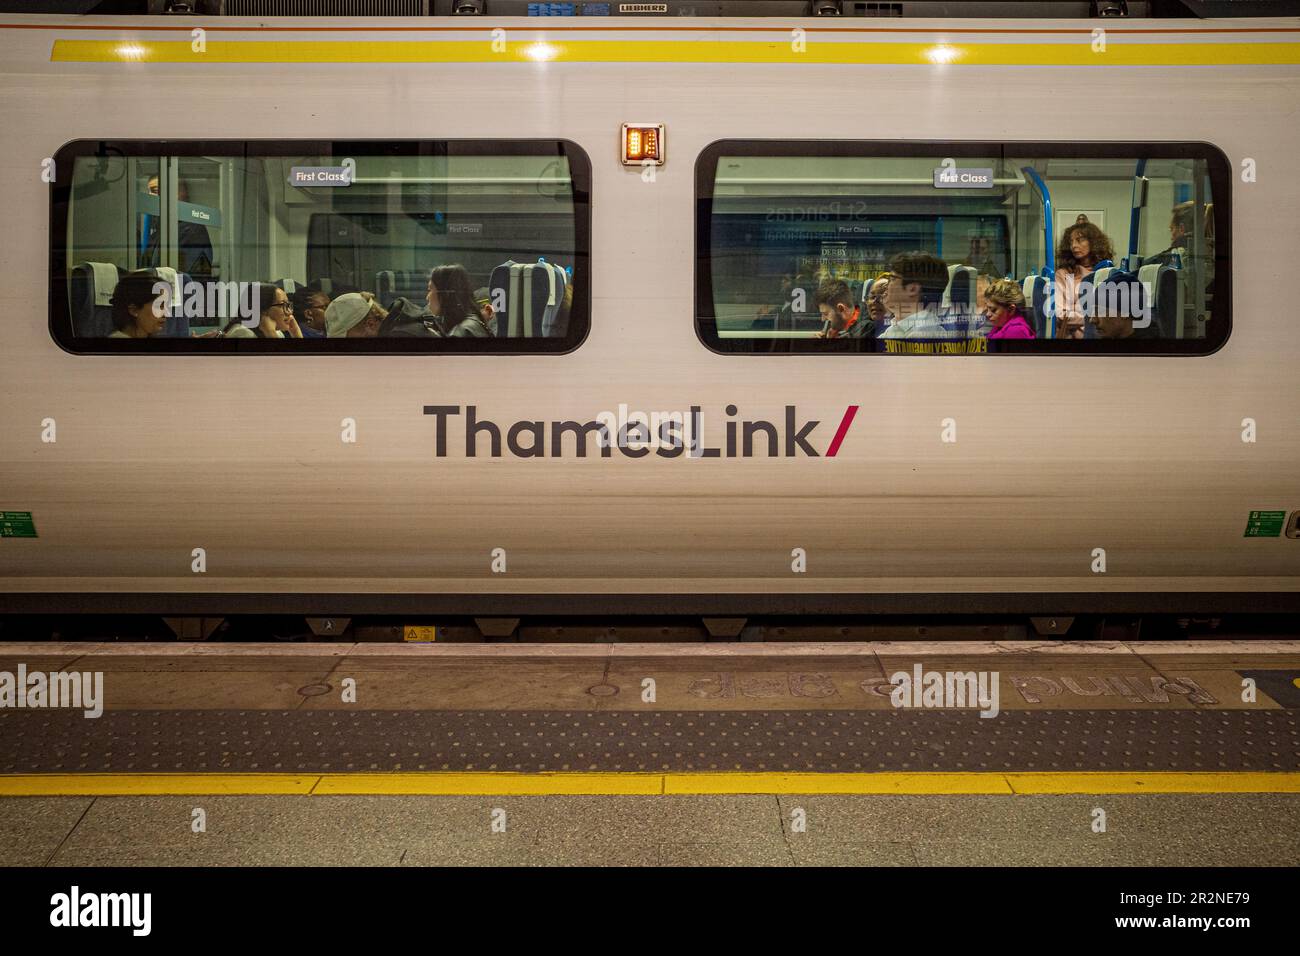 Thameslink Train - a Thameslink Train passes through St Pancras station on its journey from Brighton to Cambridge, crossing London. Stock Photo